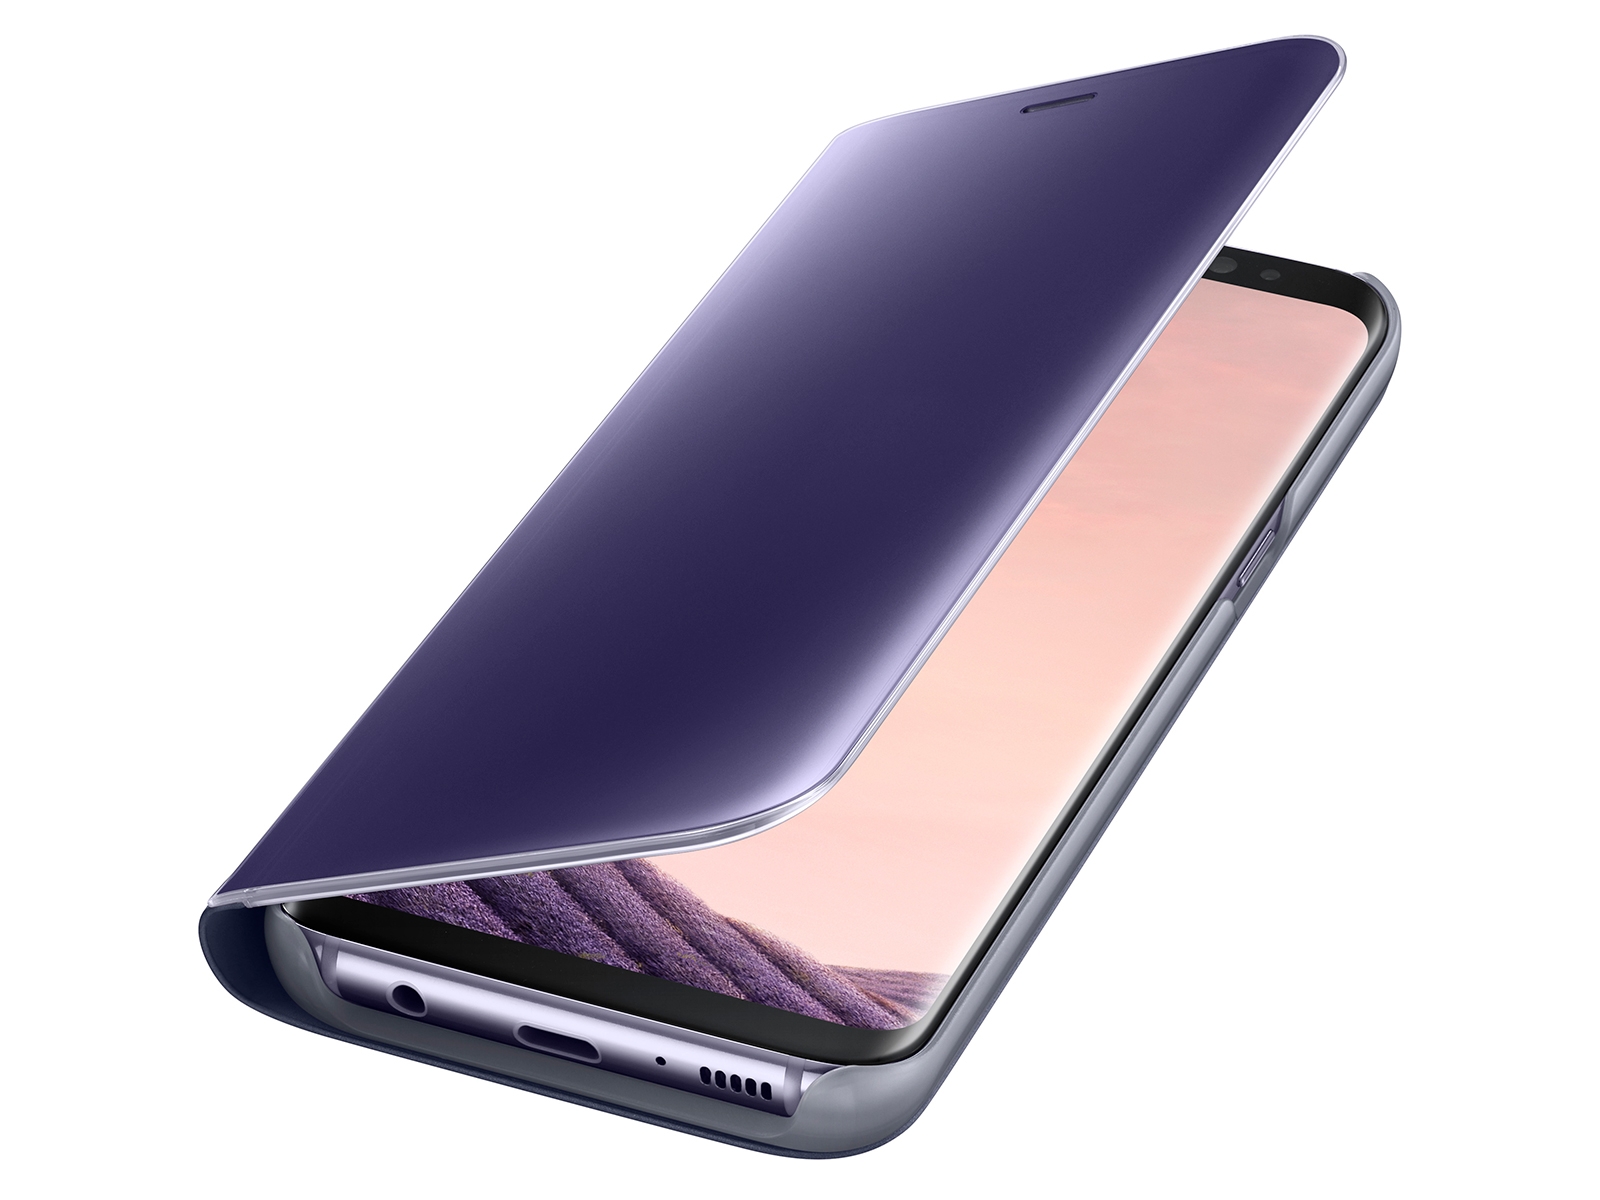 Thumbnail image of Galaxy S8 S-View Flip Cover, Orchid Gray